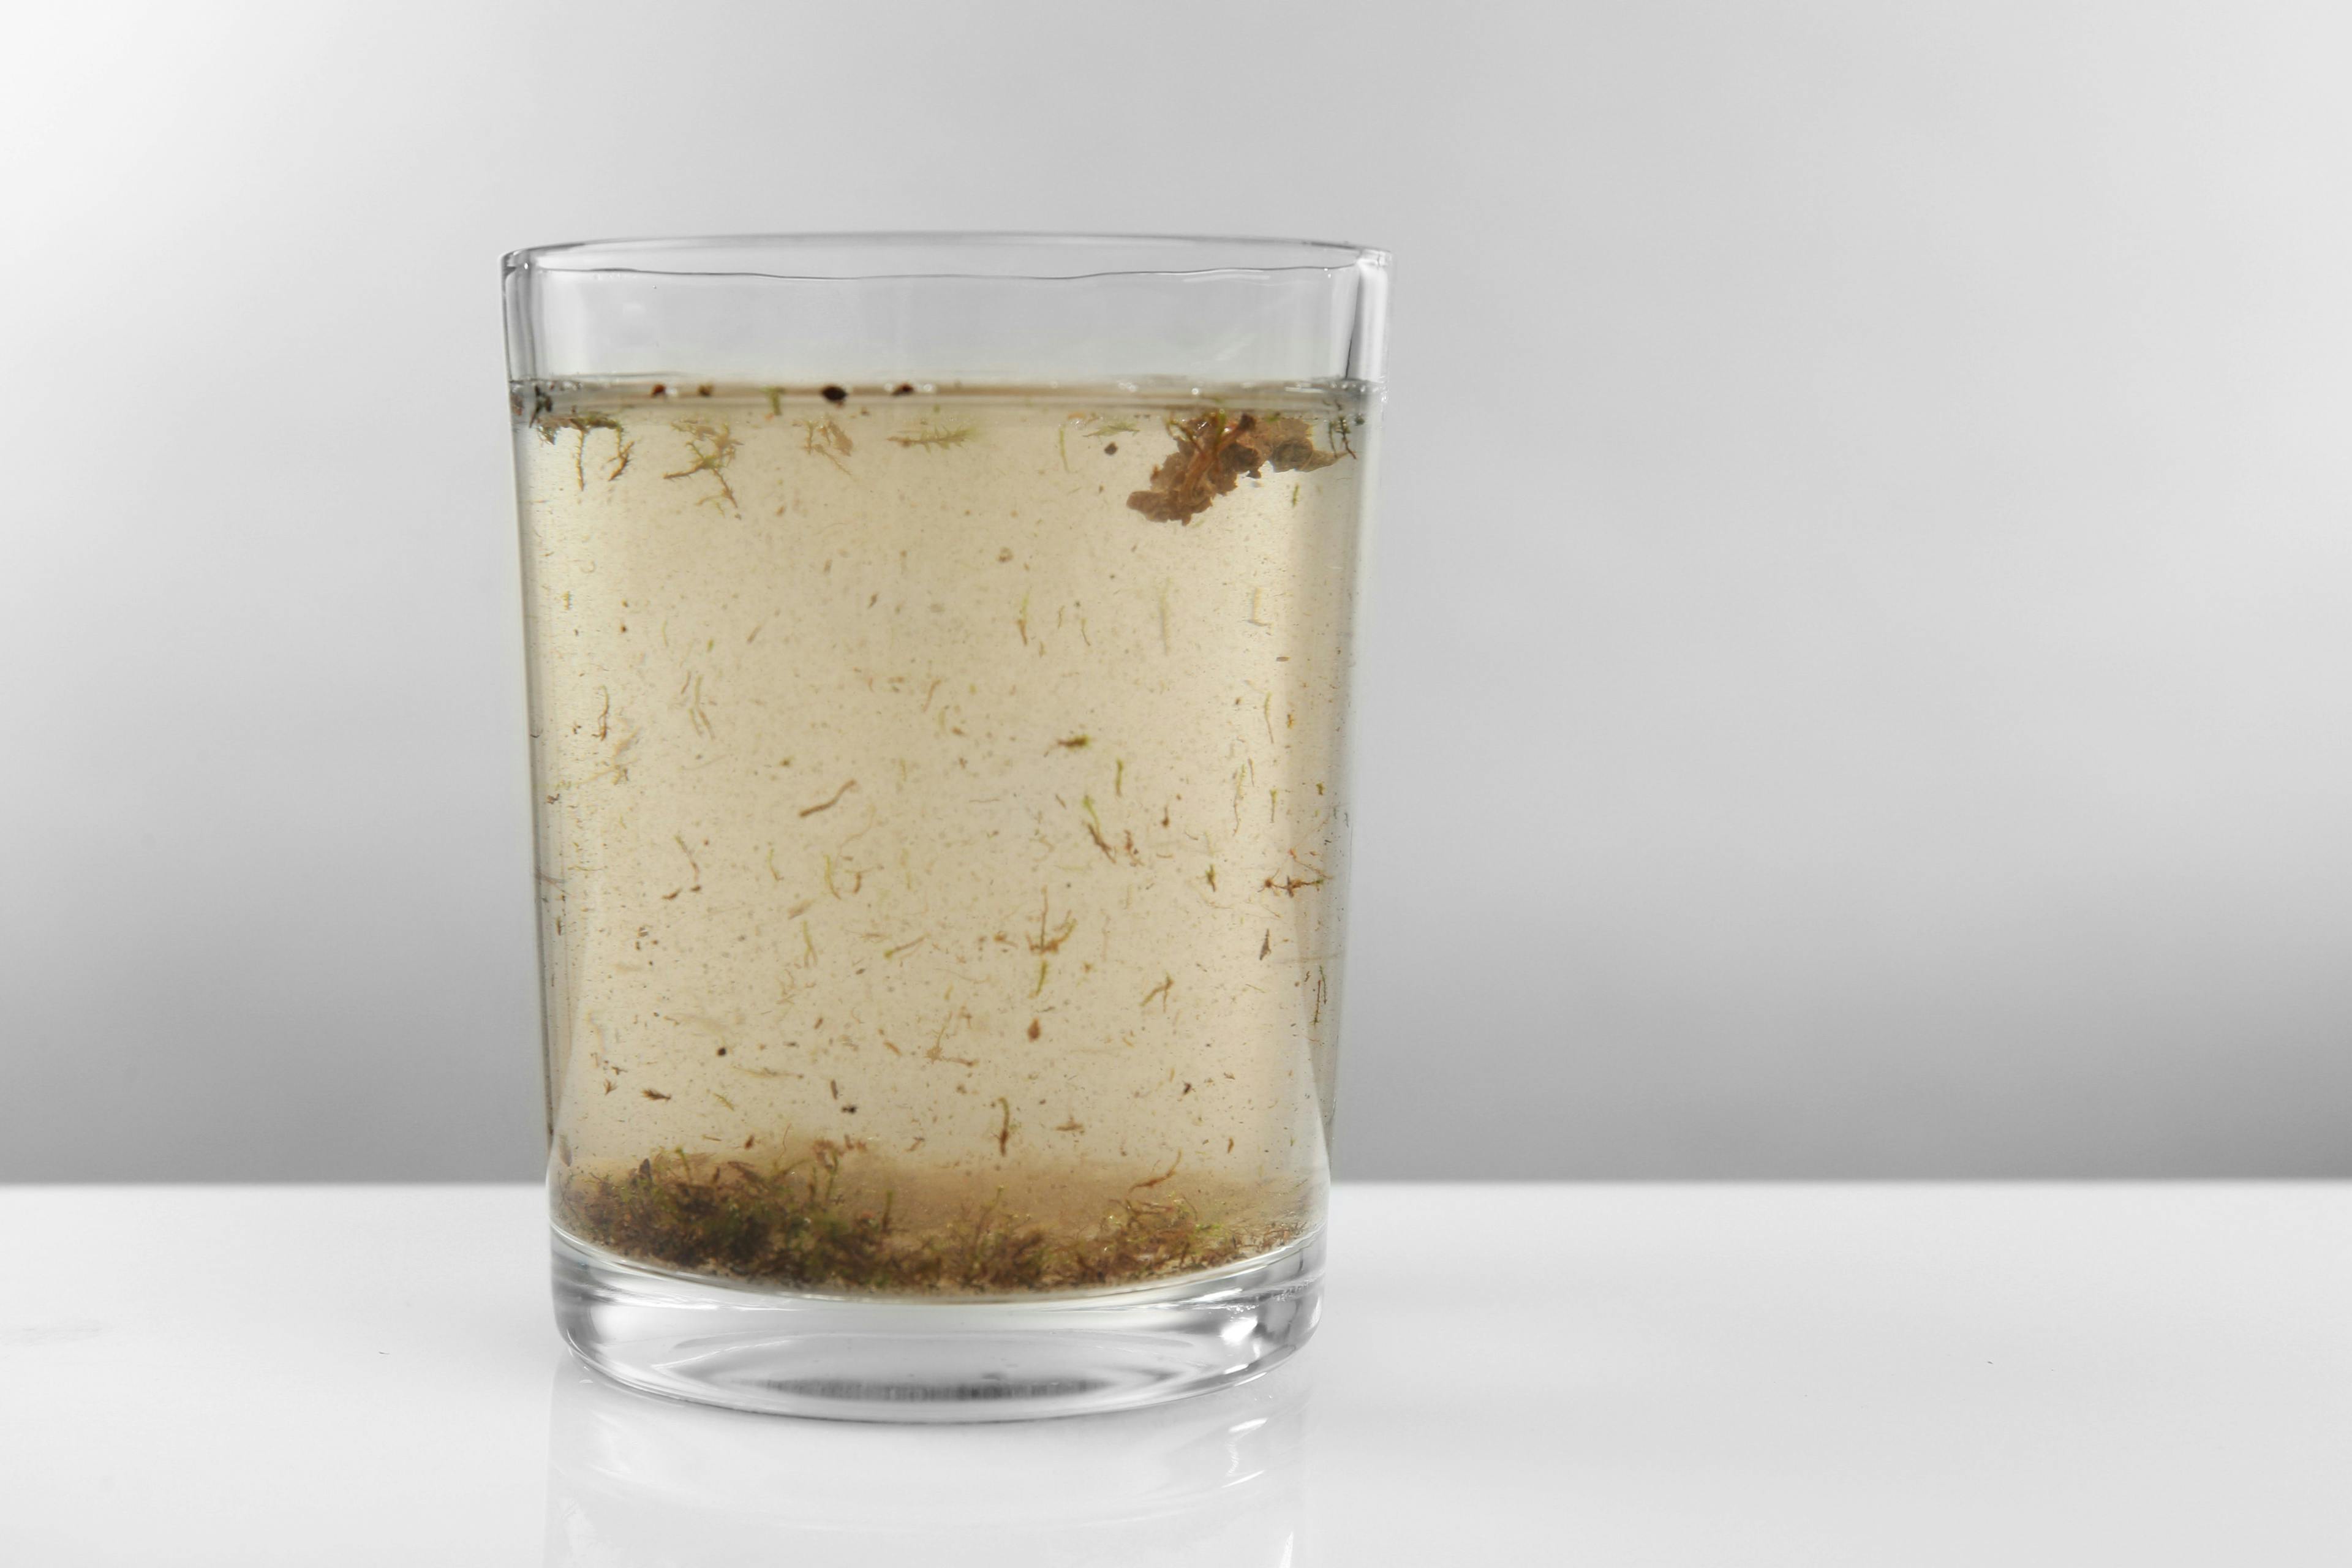 Glass of contaminated water on grey background | Image Credit: © Africa Studio - stock.adobe.com